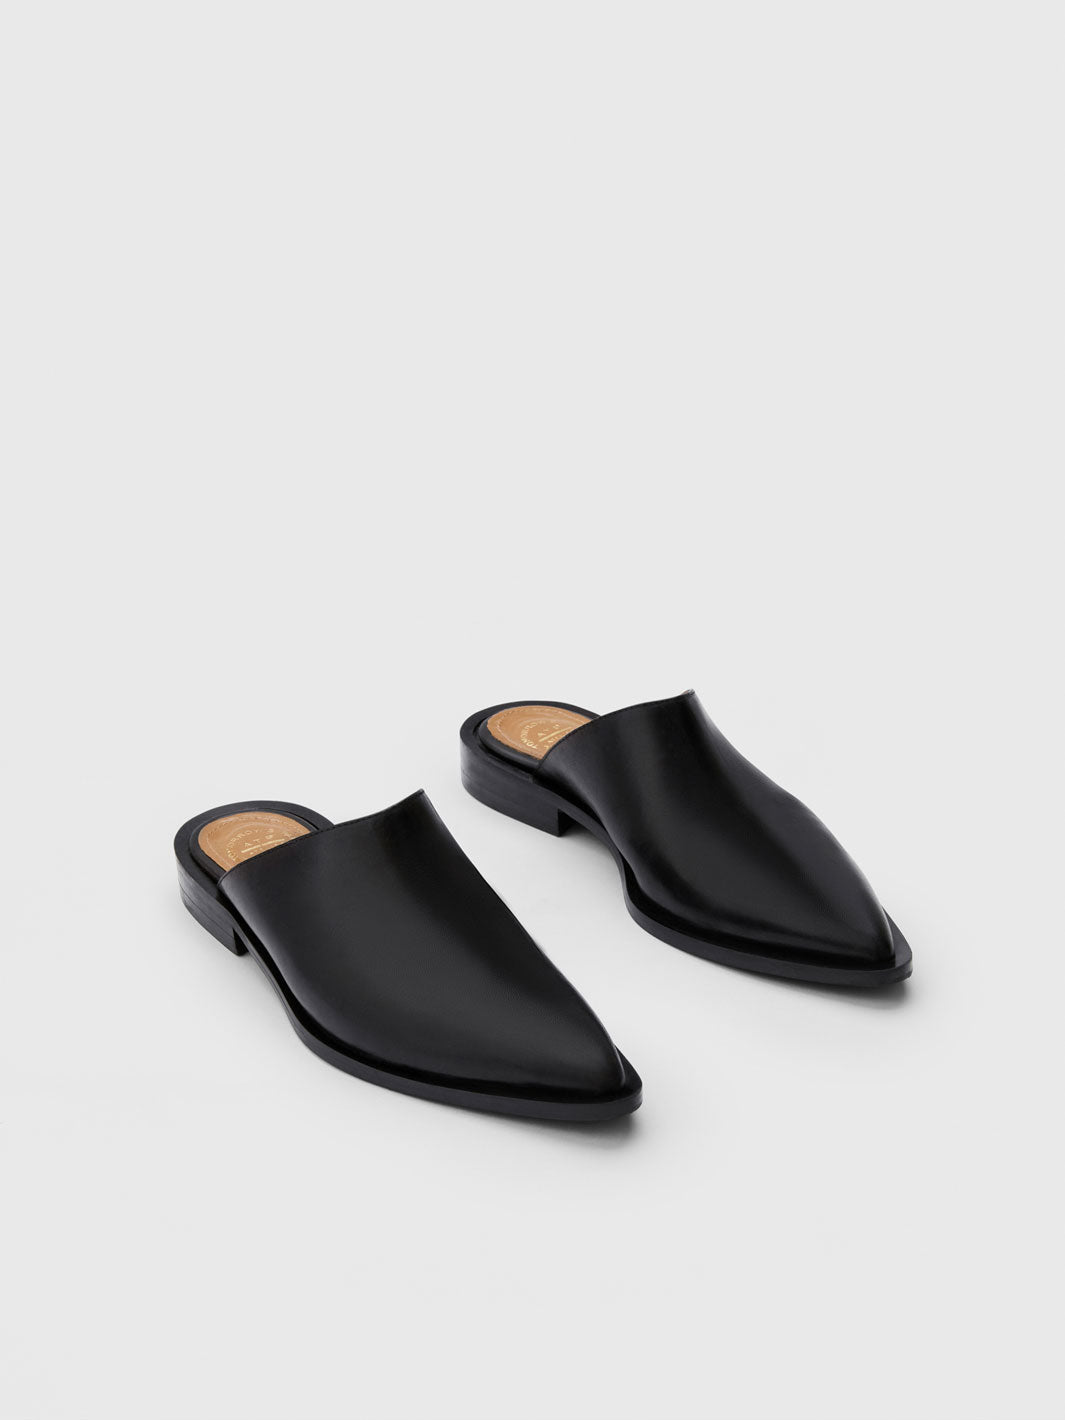 Telese Black Leather Mules